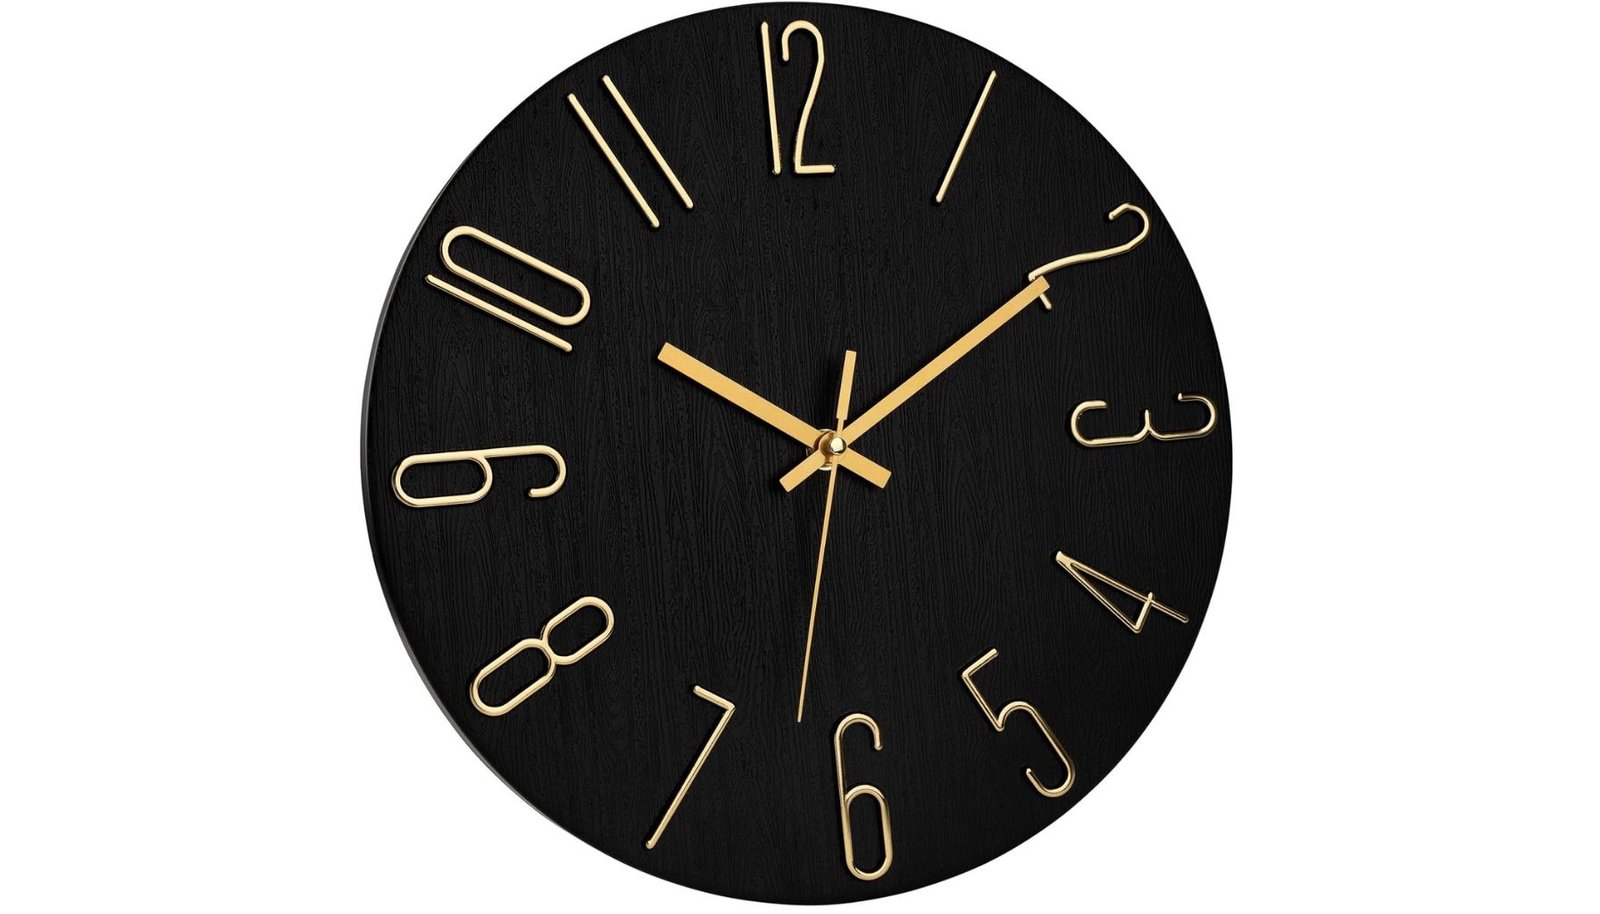 Foxtop 12 Inch Silent Non-Ticking Wall Clock Review